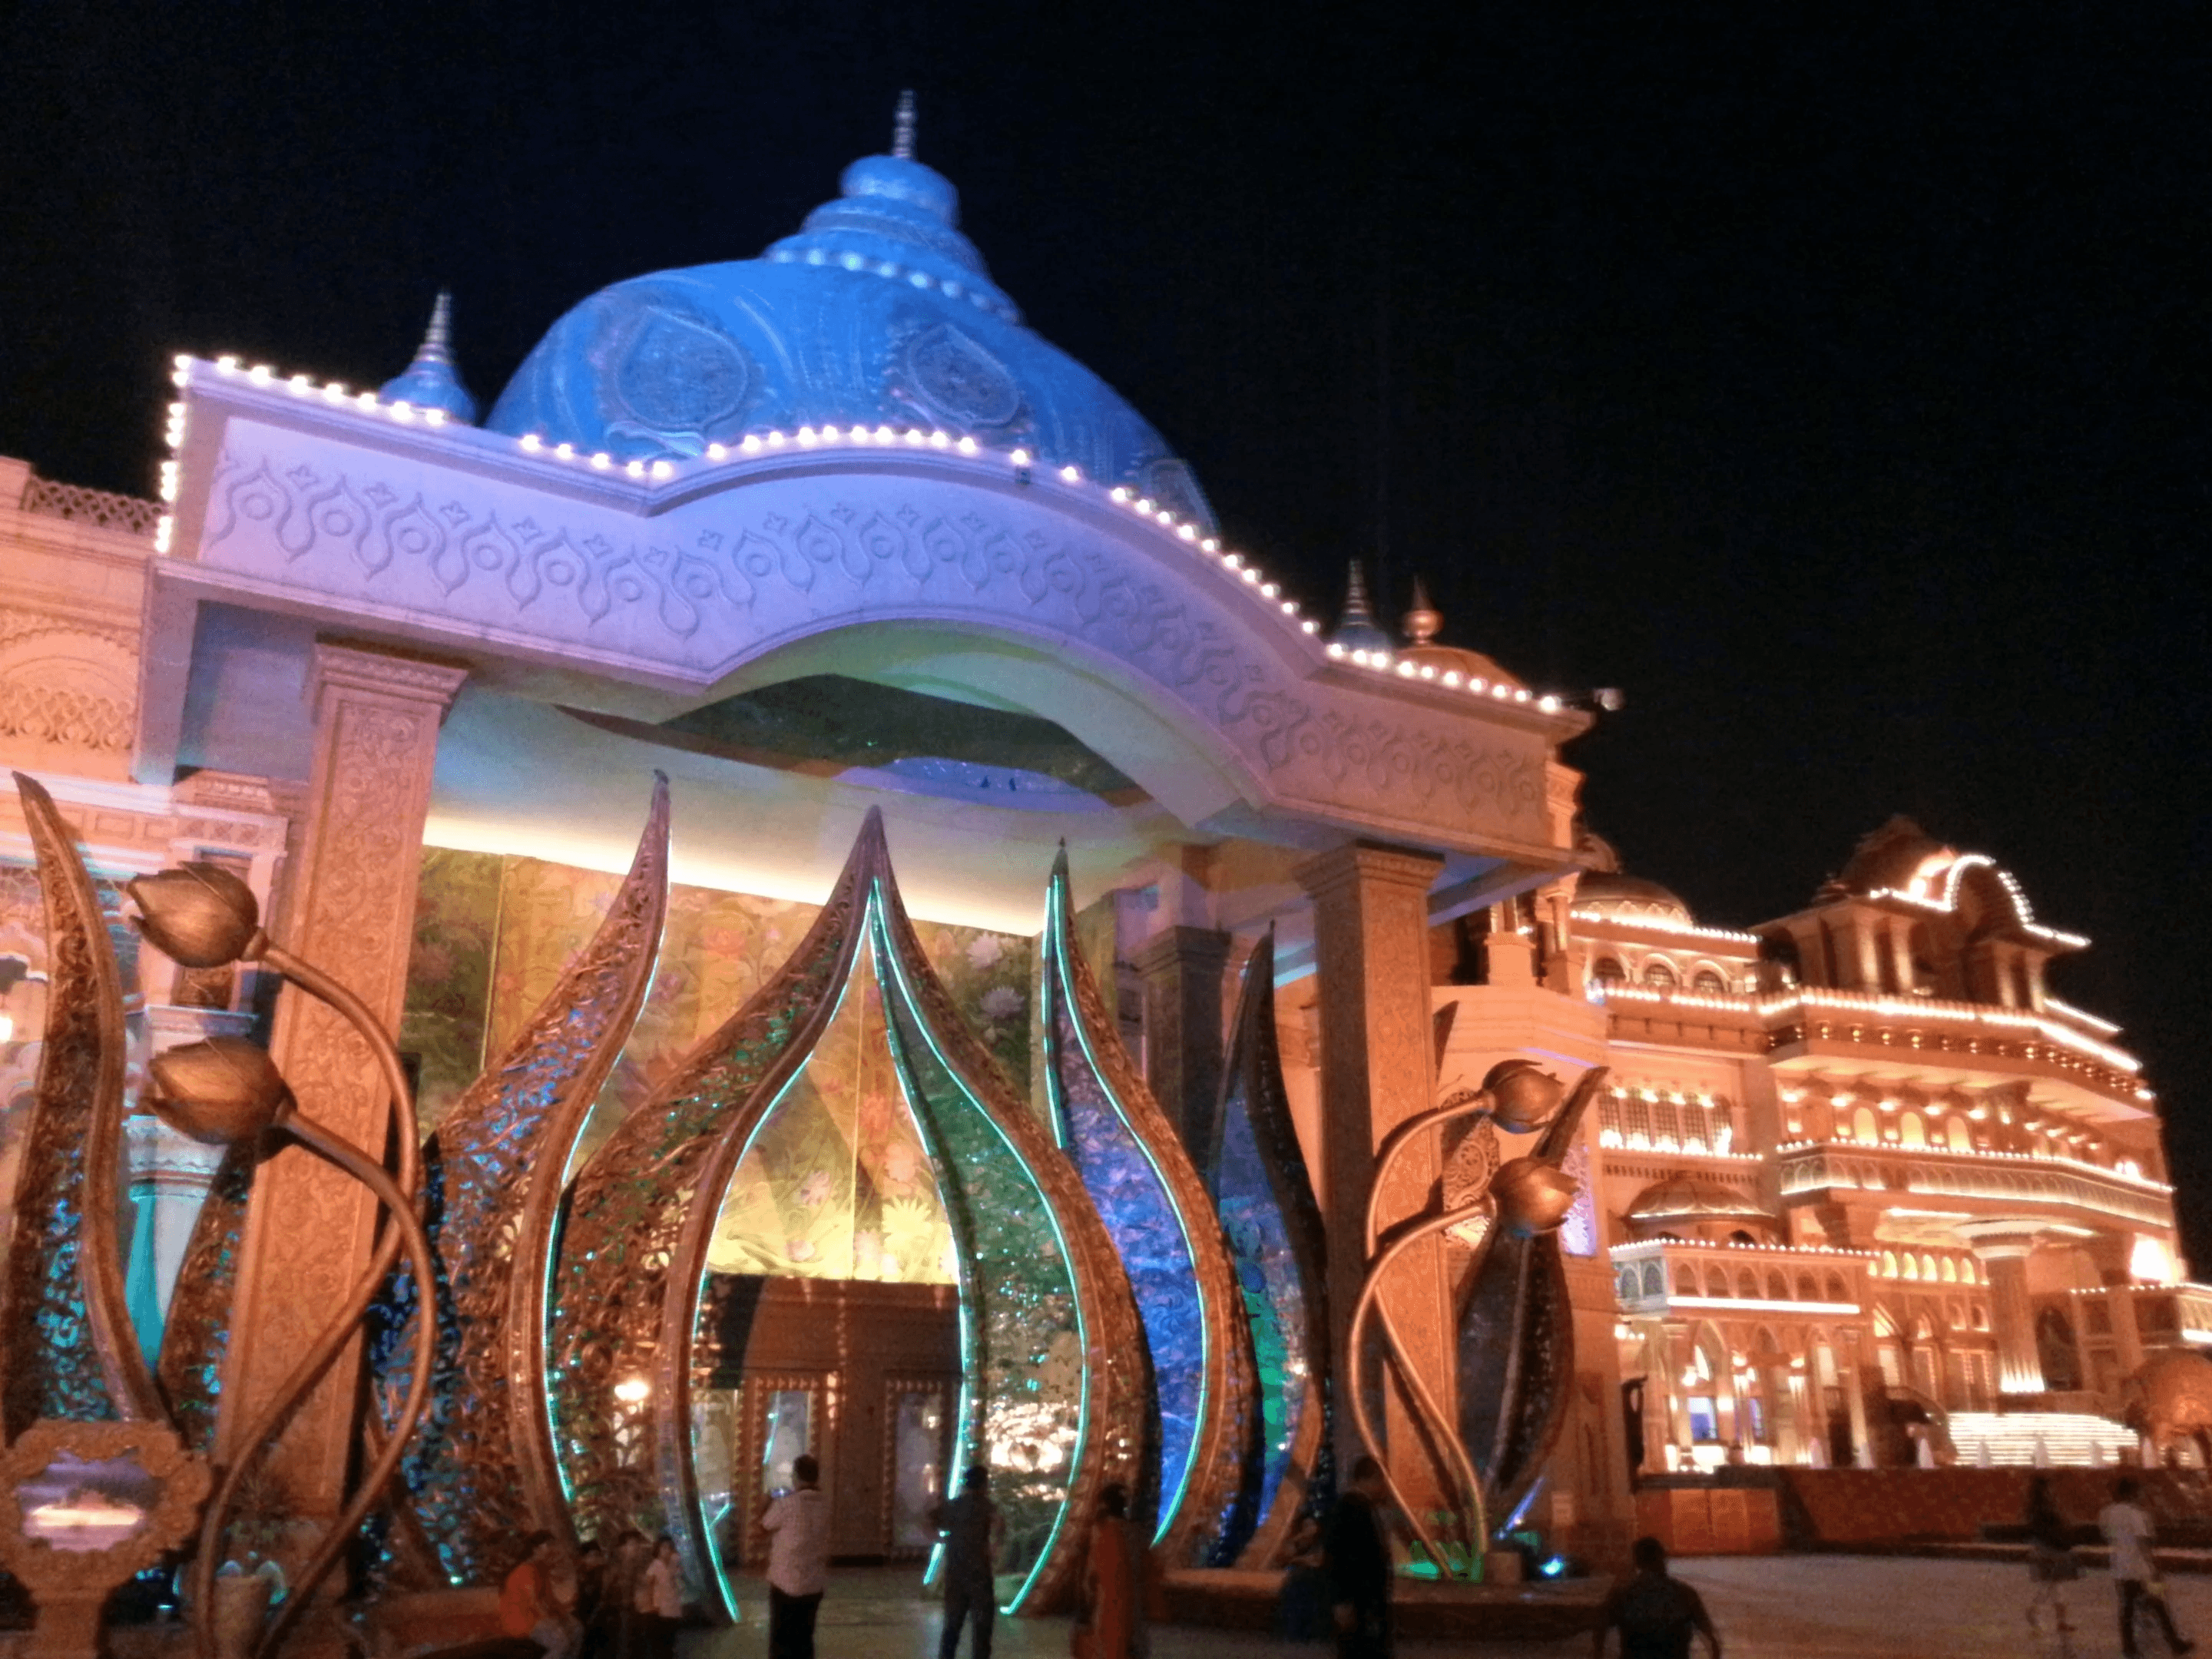 Kingdom of Dreams, amidst a breathtaking landscape very close to the place
